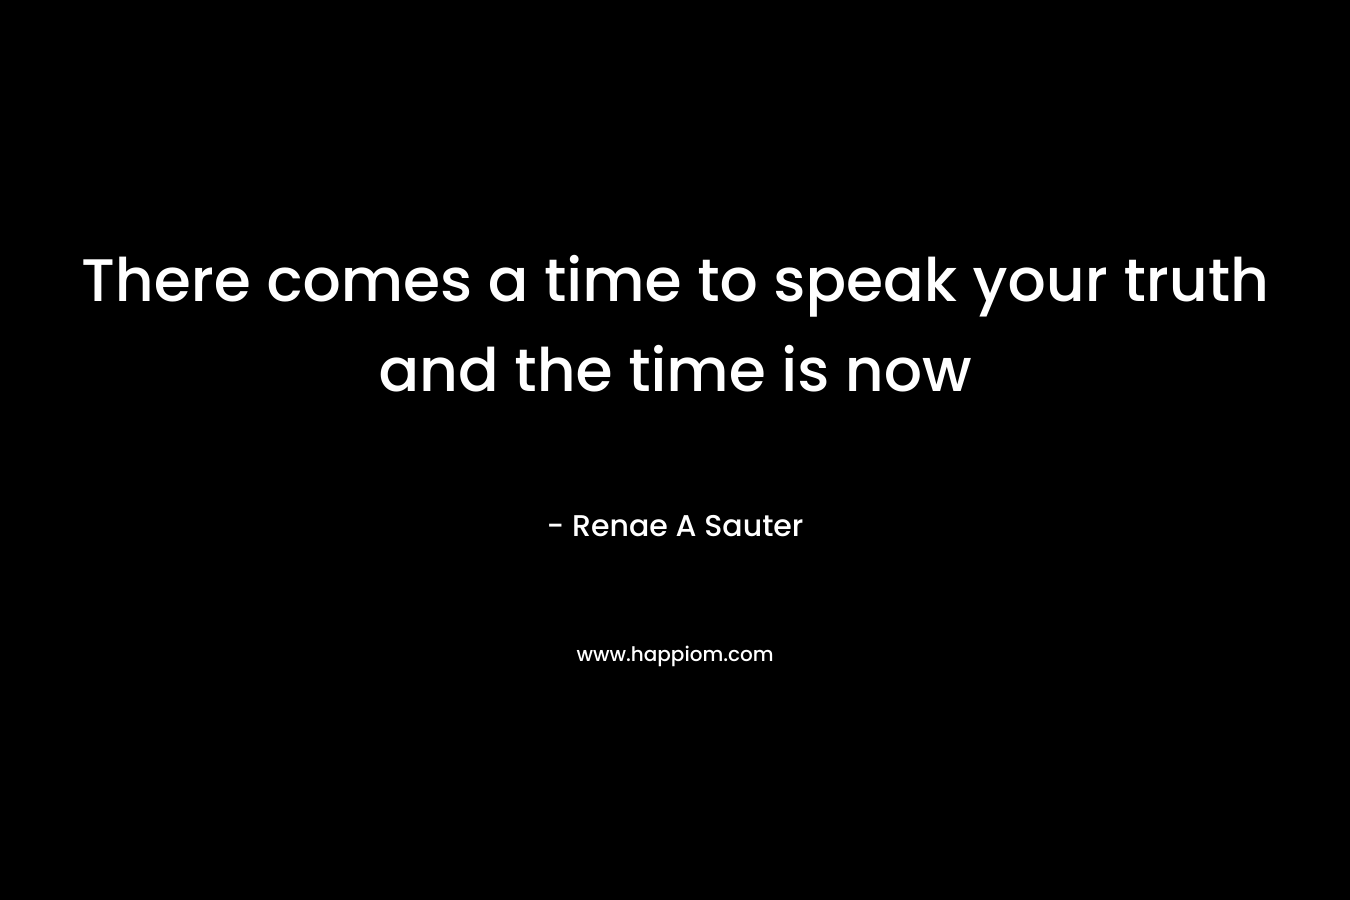 There comes a time to speak your truth and the time is now